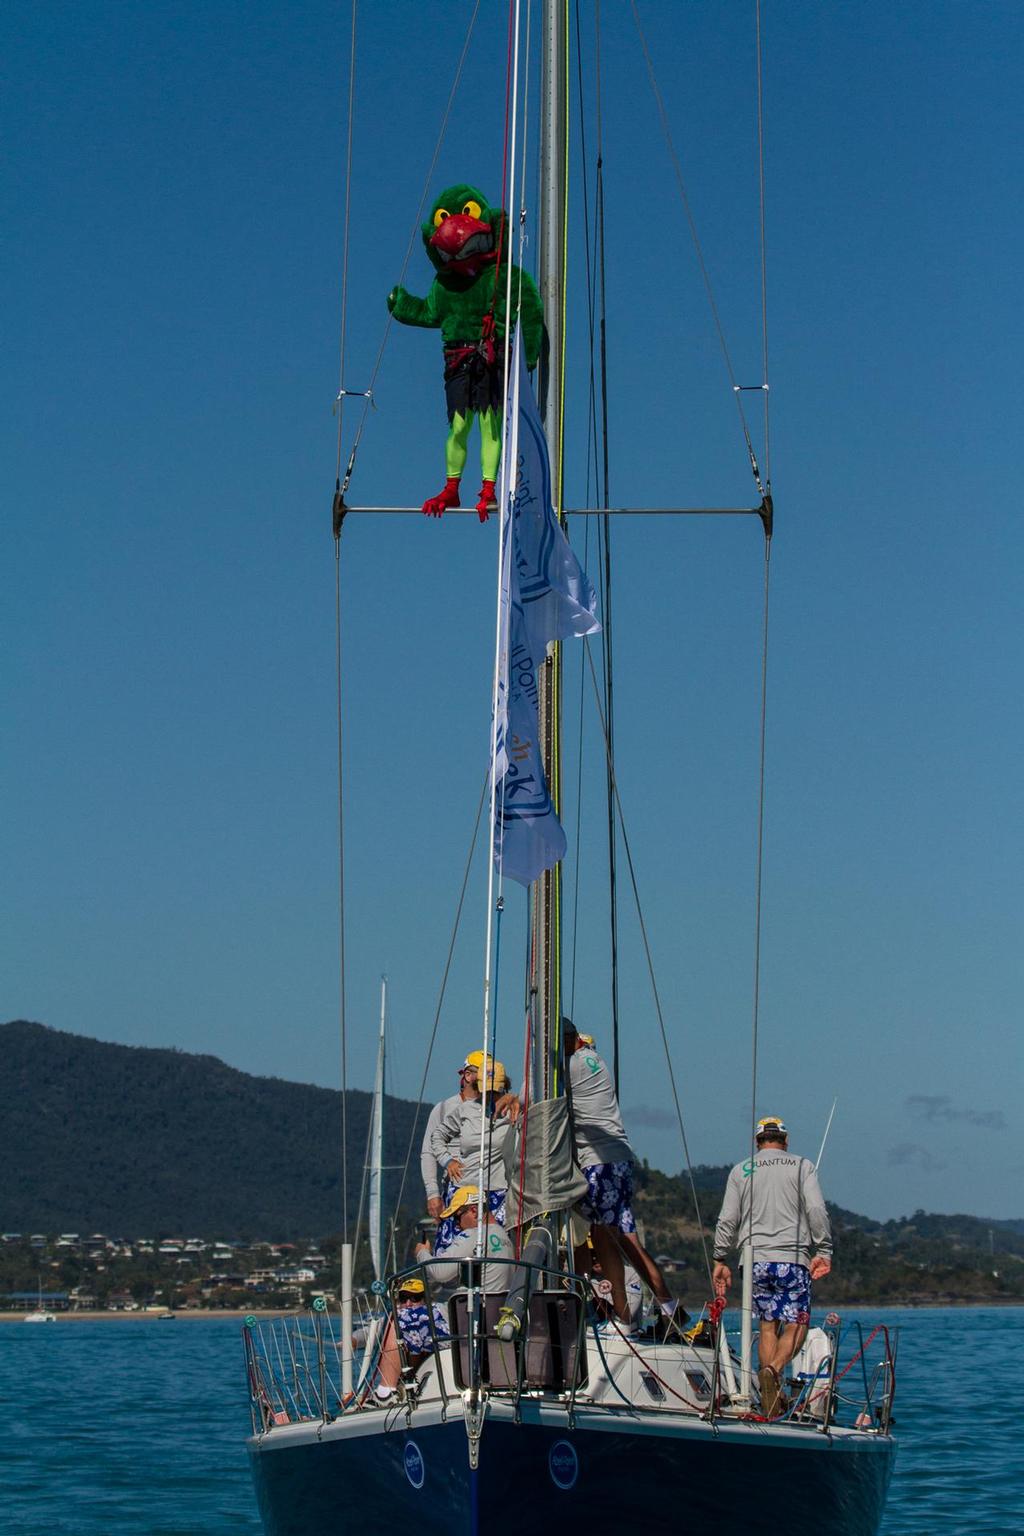 Checking out the fleet on Wallop - Airlie Beach Race week 2013 © Shirley Wodson